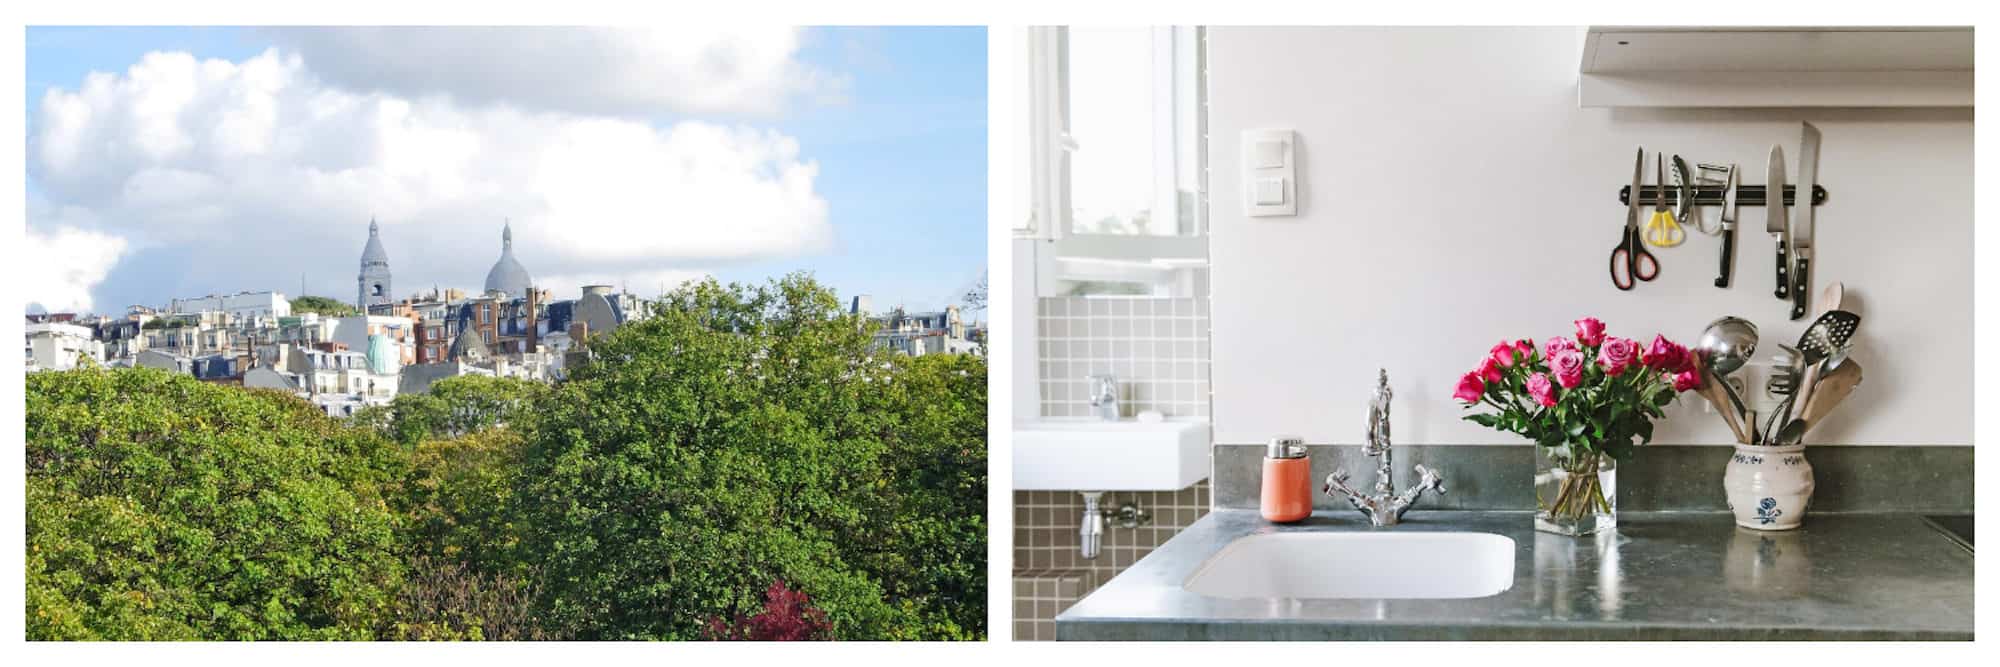 Beautiful Paris spots then and now, including a canopy of trees with the Sacré Coeur Basilica peeping out the top (left). A bunch of pink tulips on the counter of a Paris rental apartment (right).